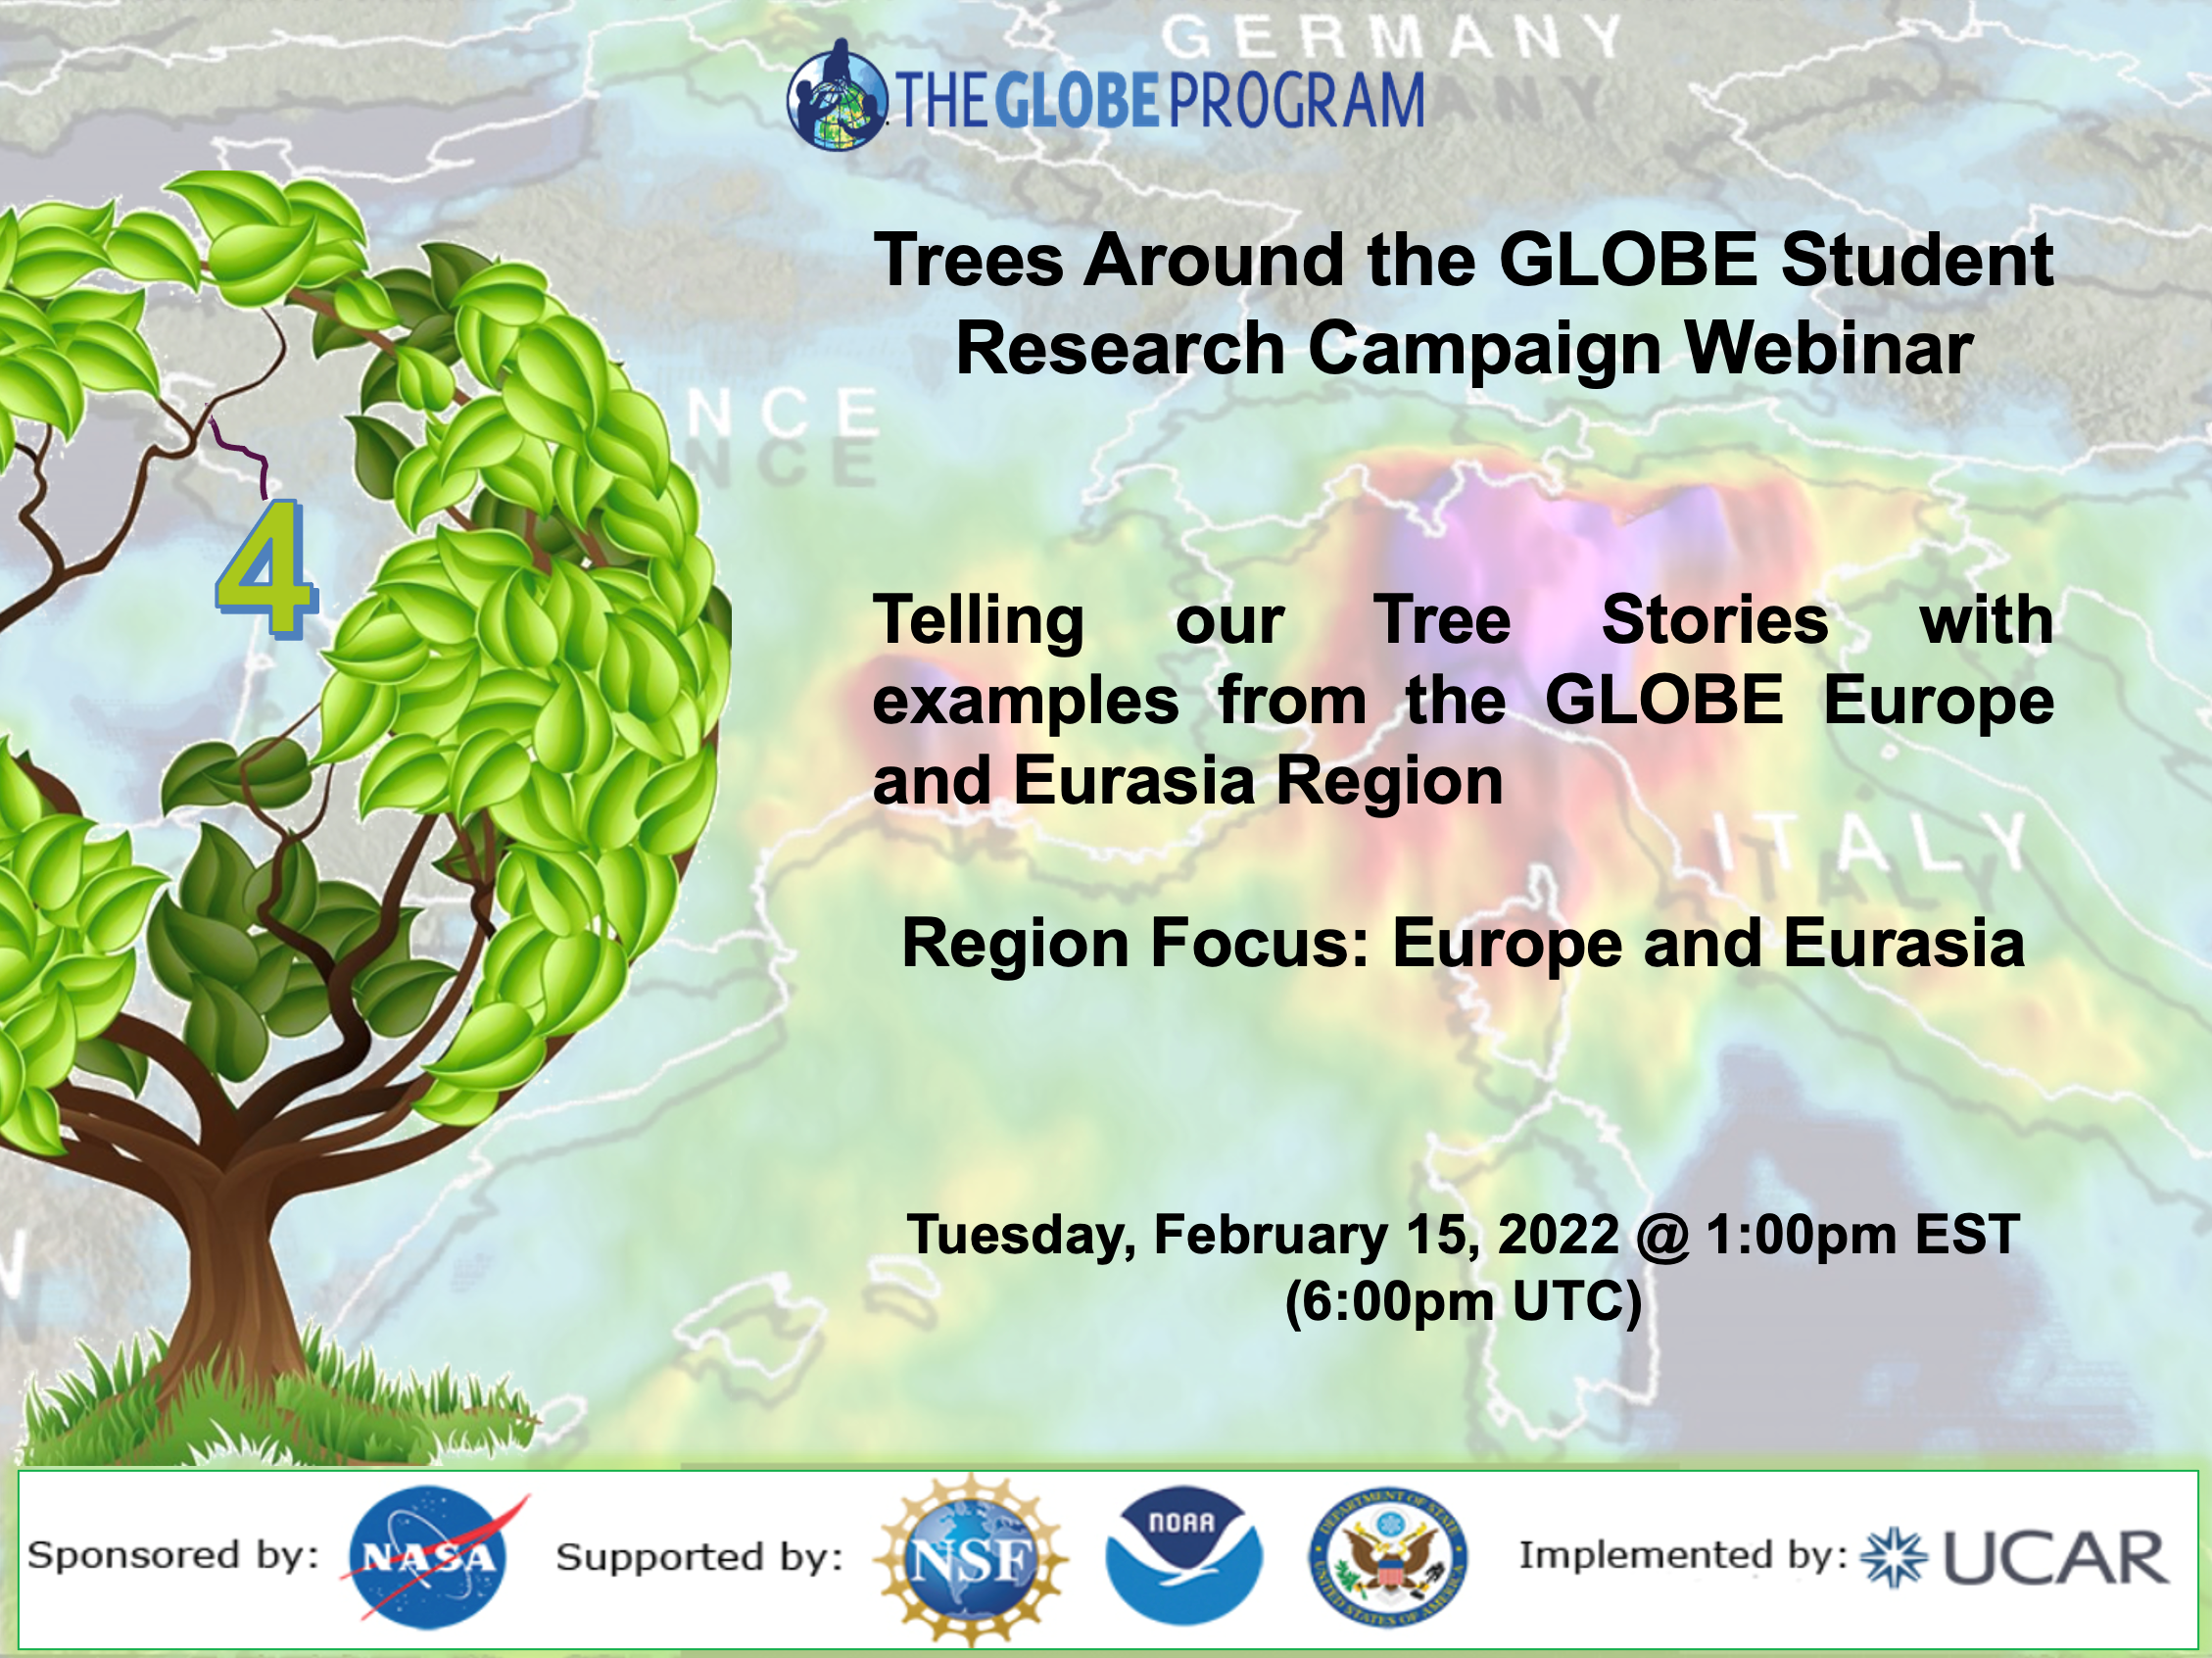 Trees Around the GLOBE 15 February webinar shareable, showing a trees and stating the time/date of the webinar